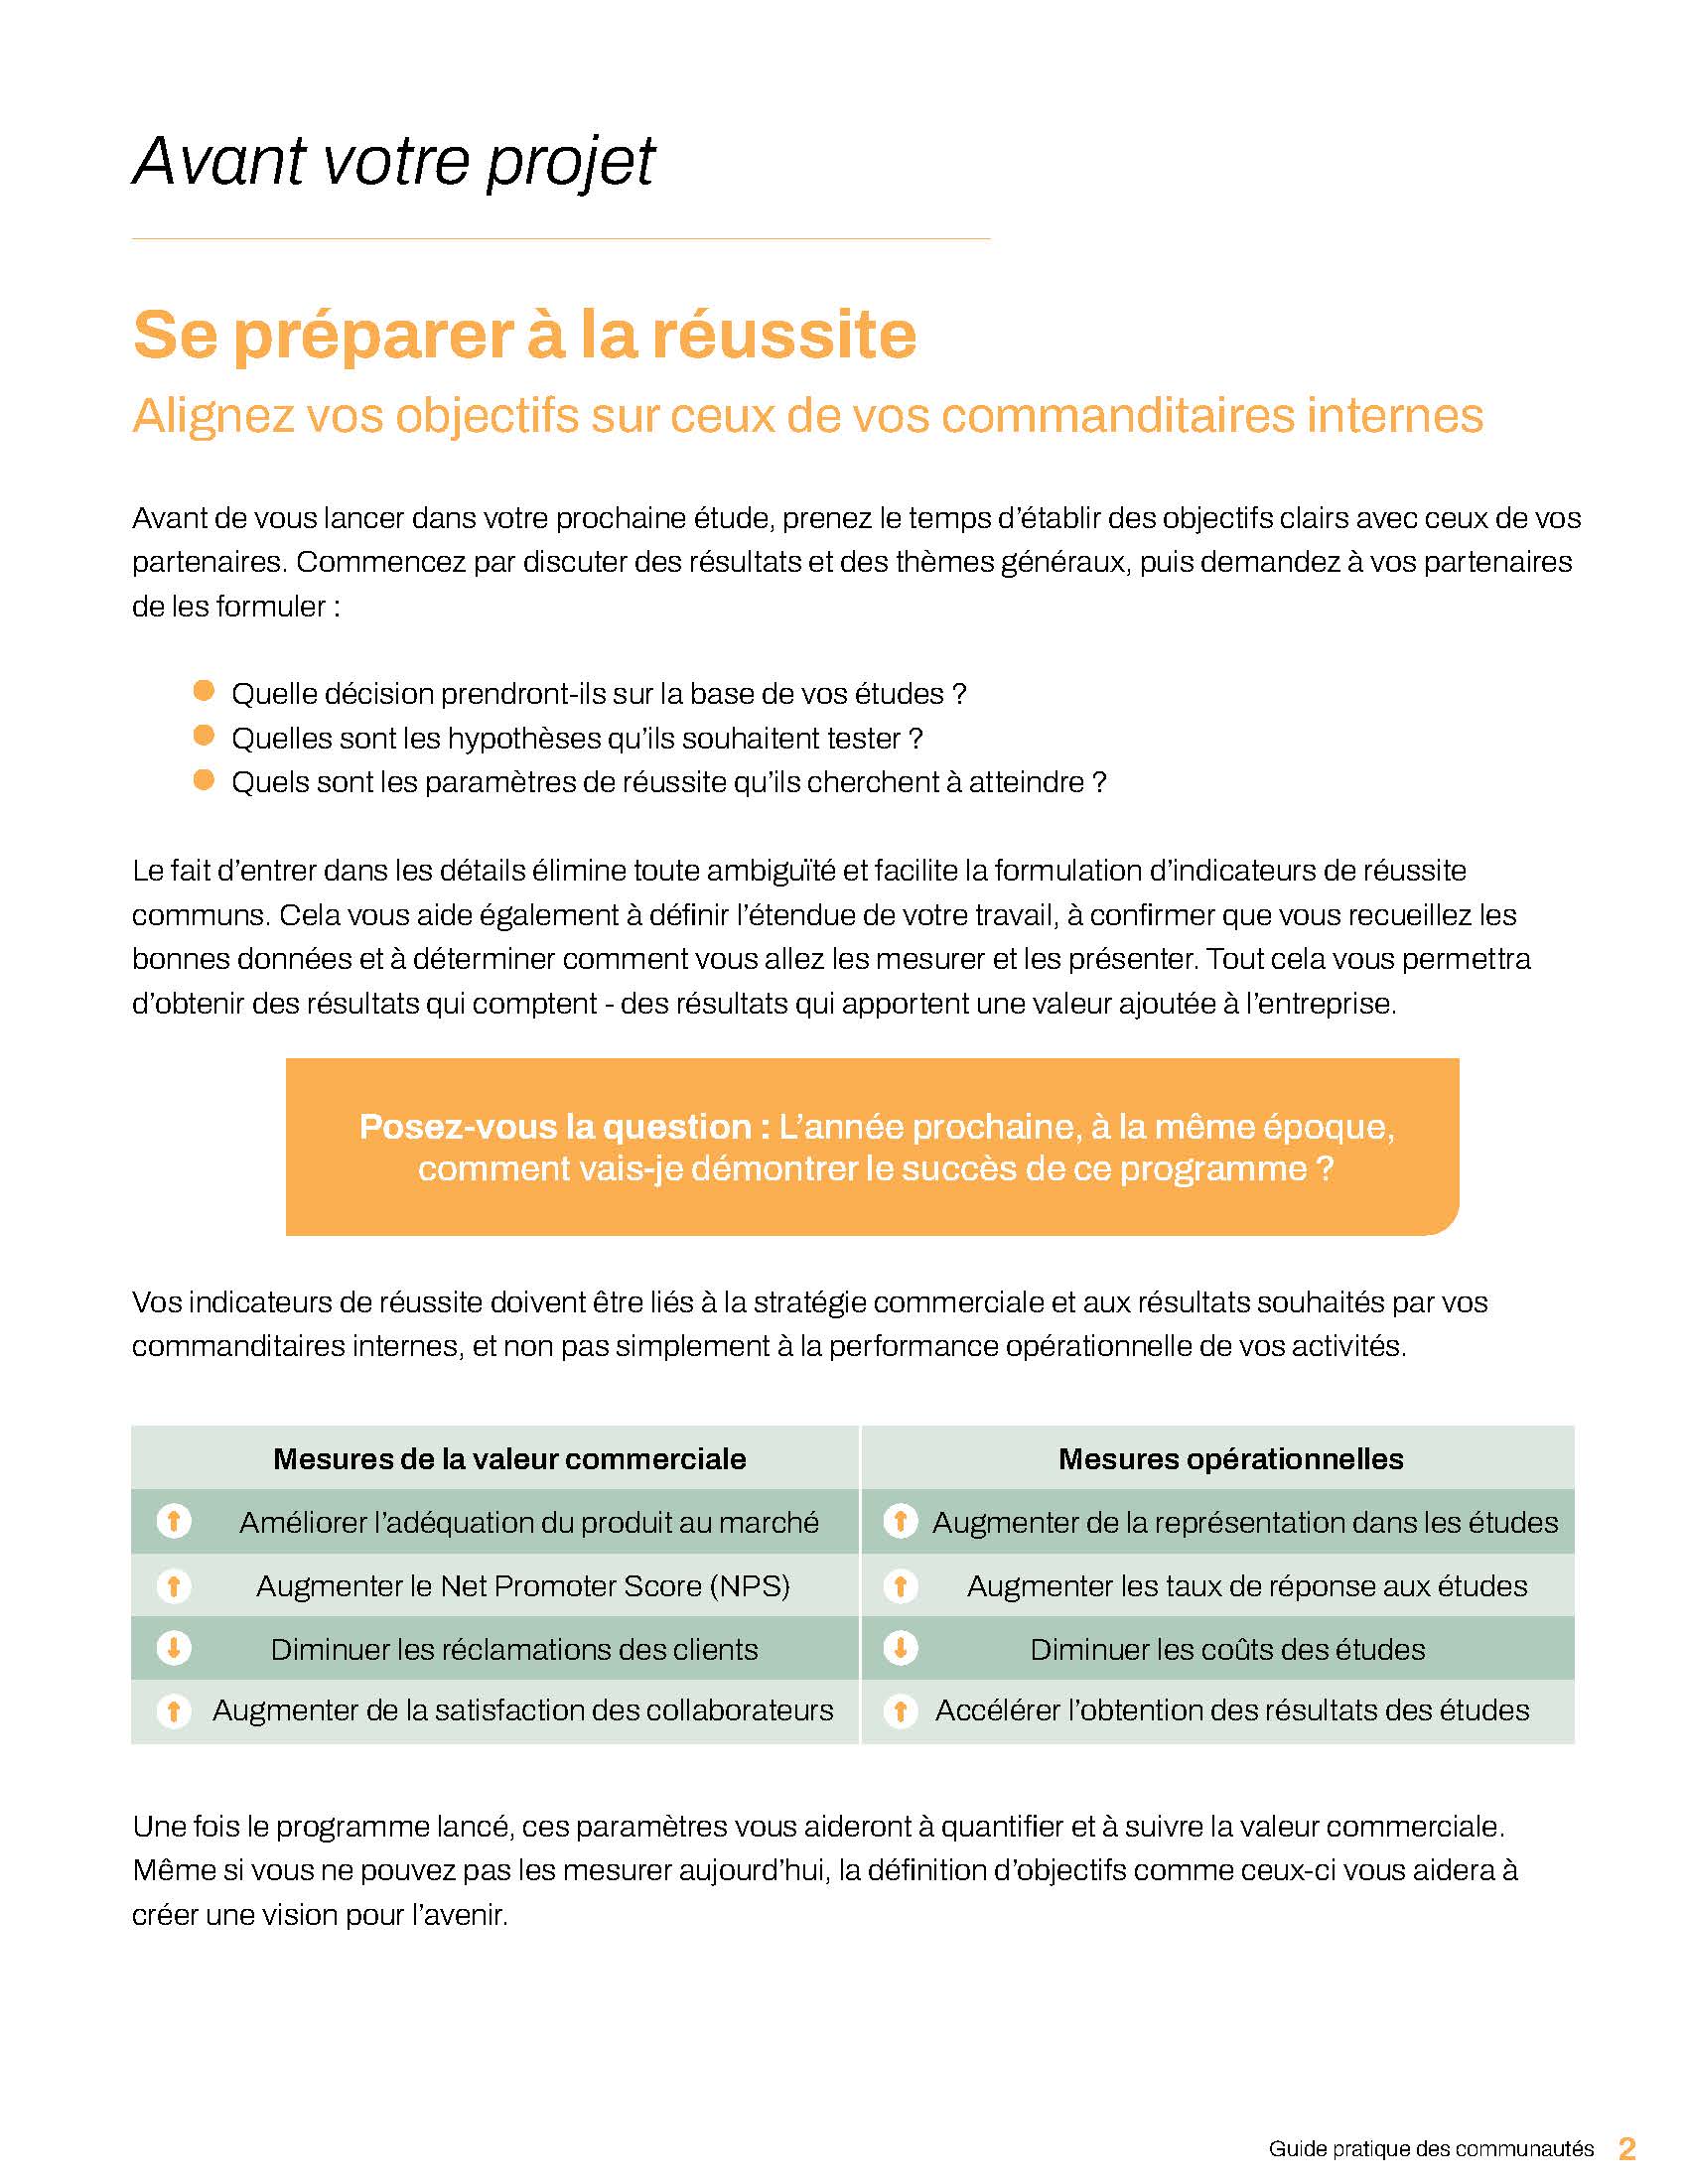 best-practices-ebook-FR_Page_03